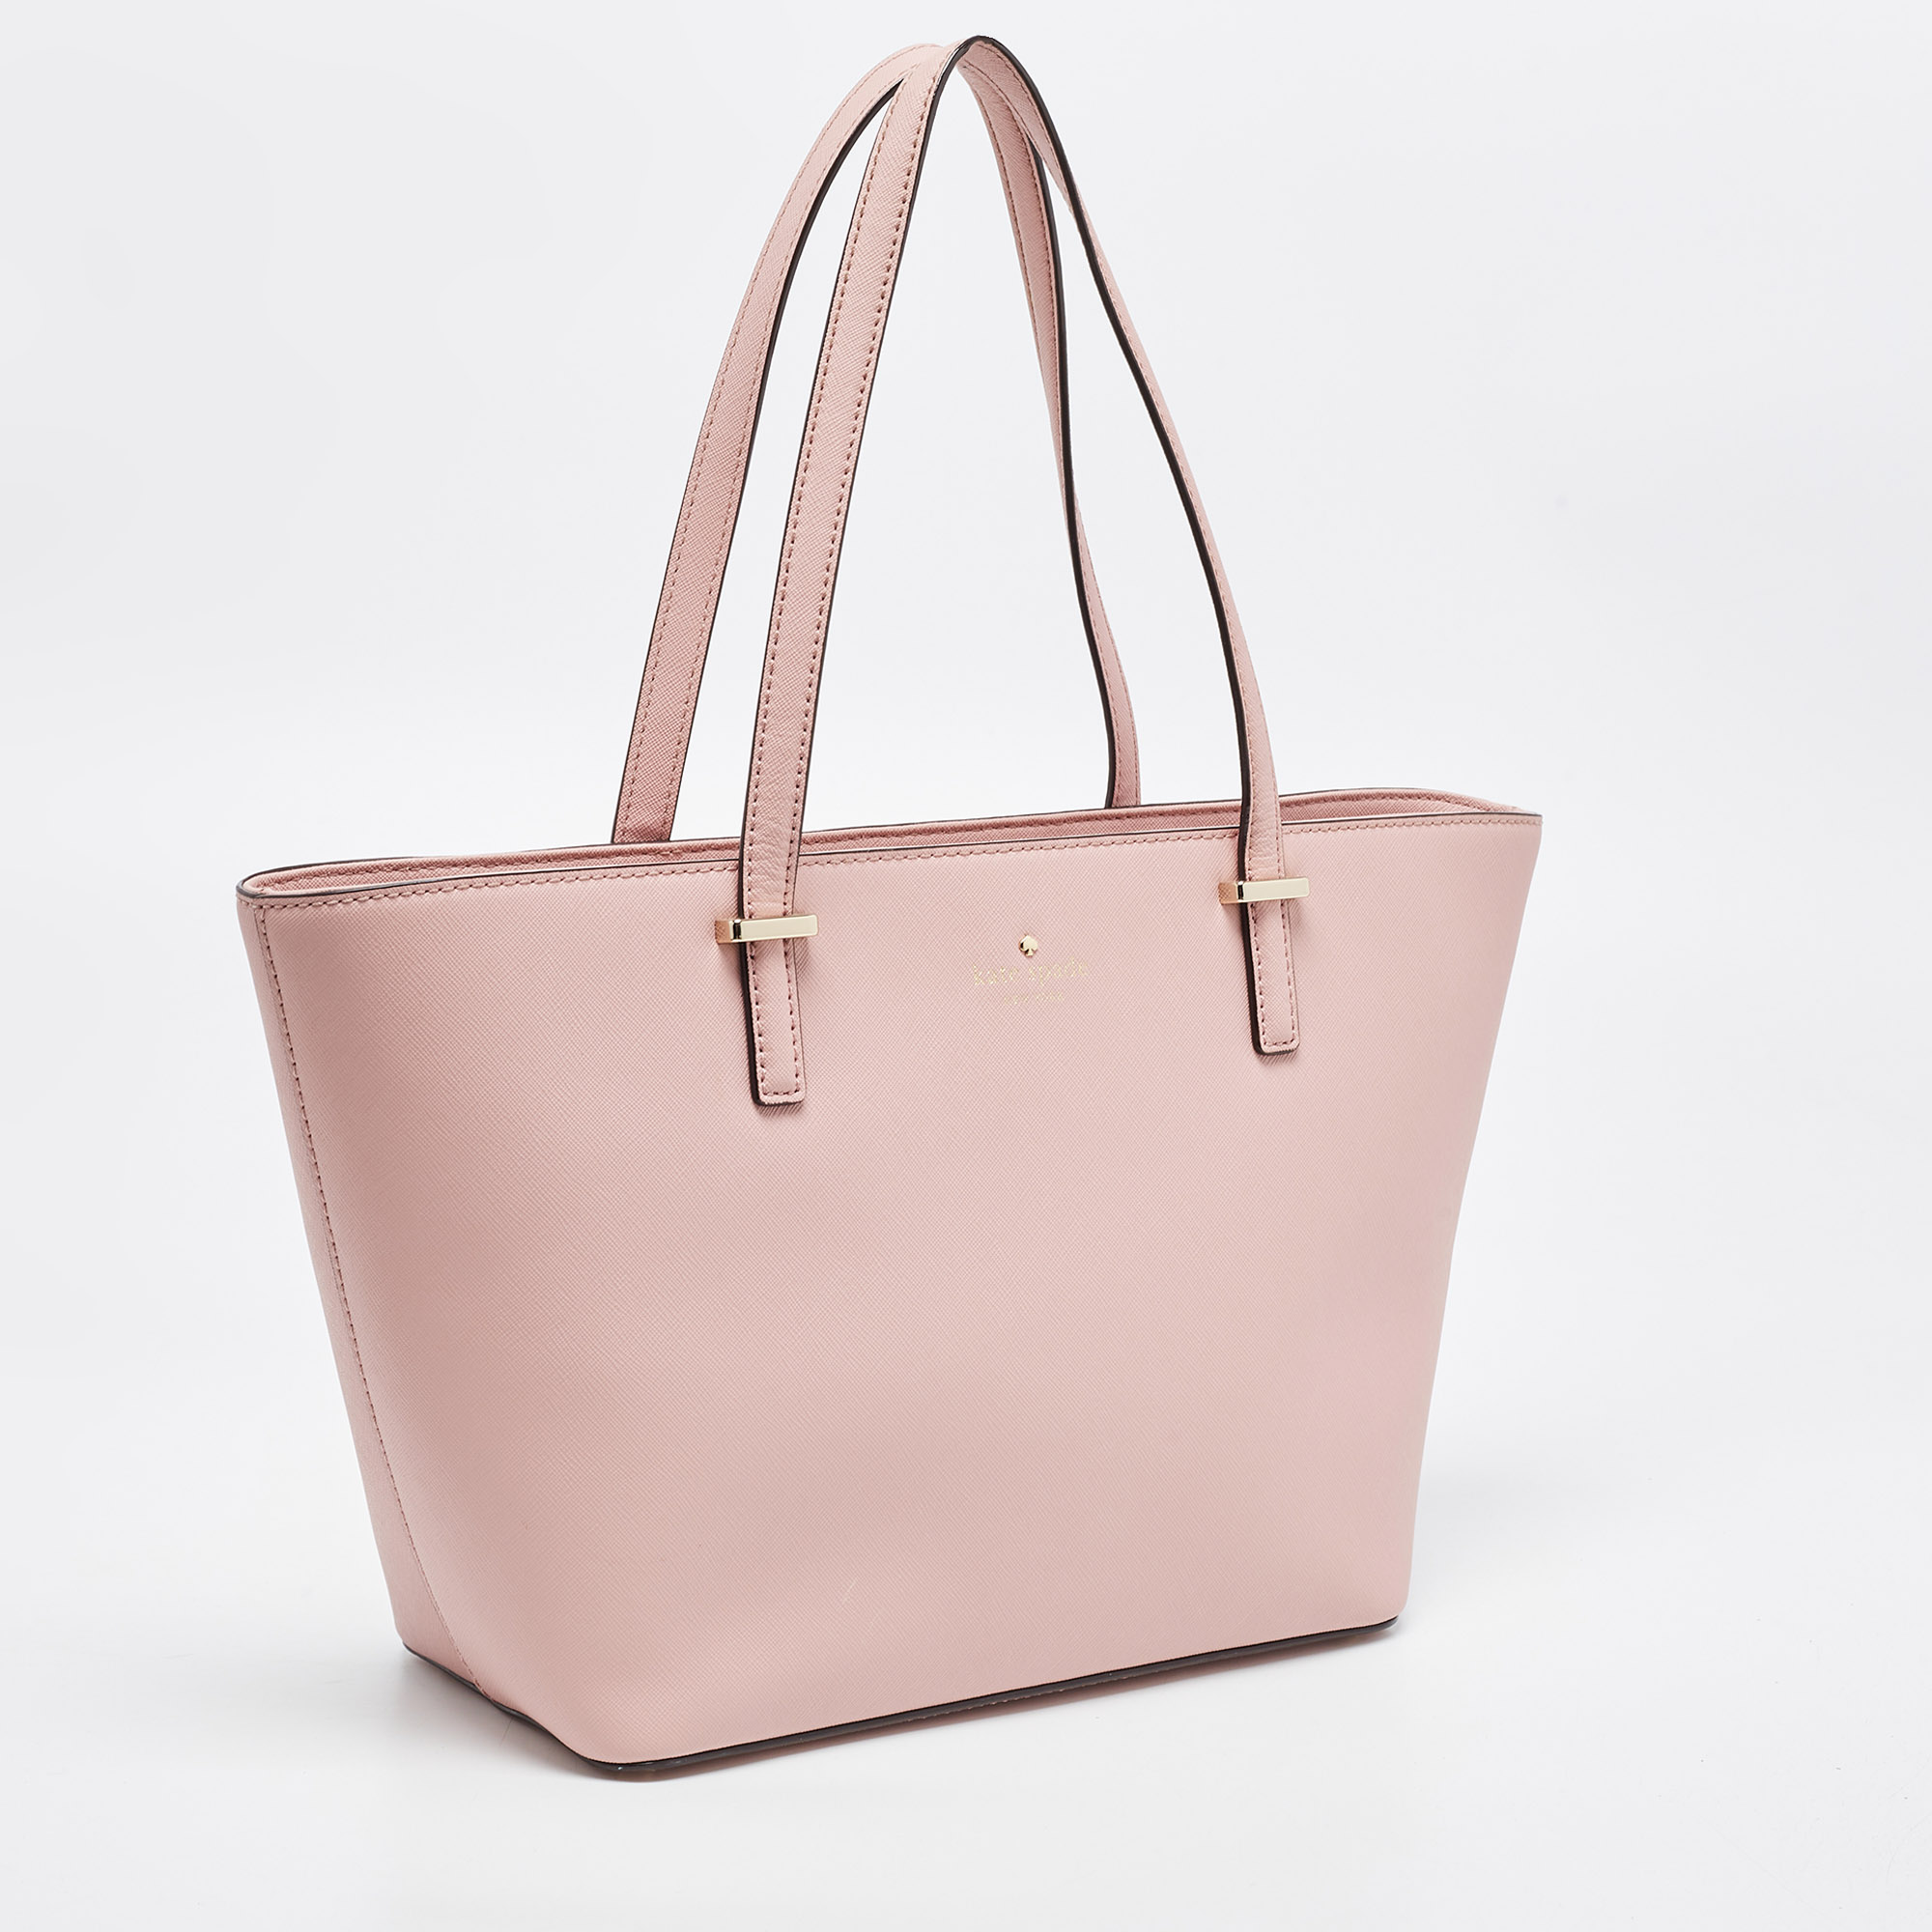 Kate Spade Pink Leather Harmony Tote